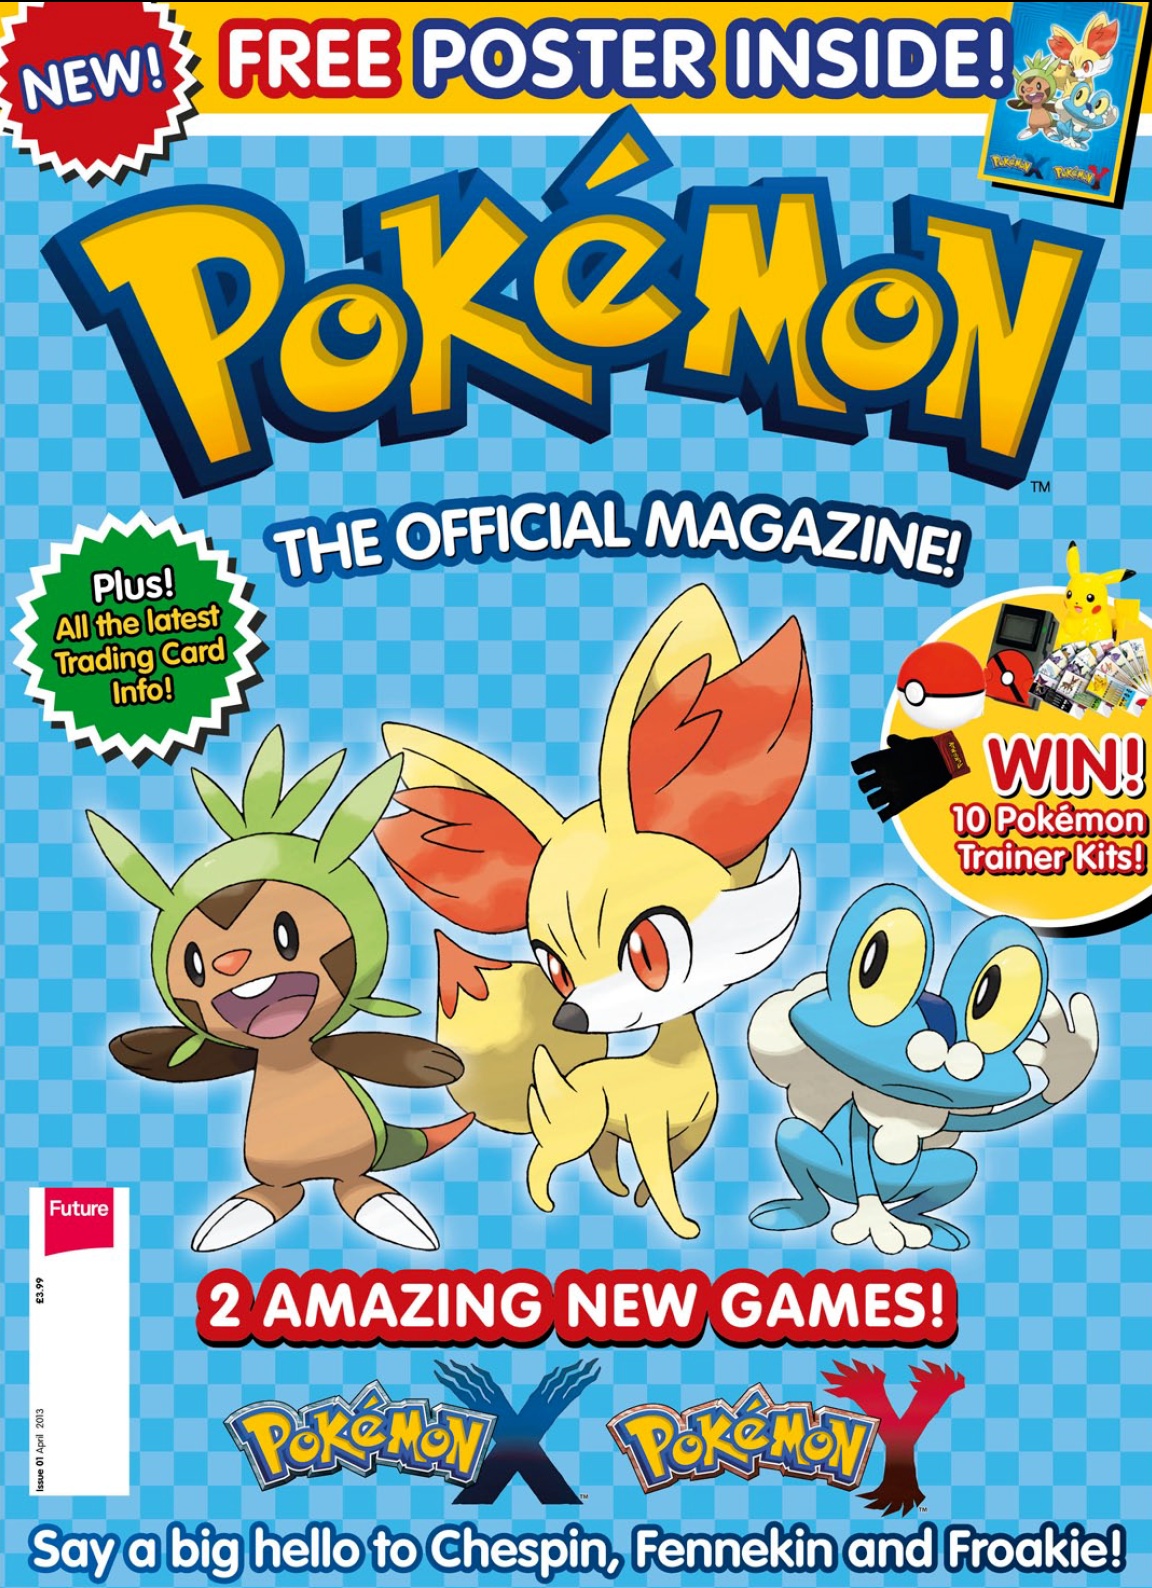 UK gets an official Pokemon magazine photo